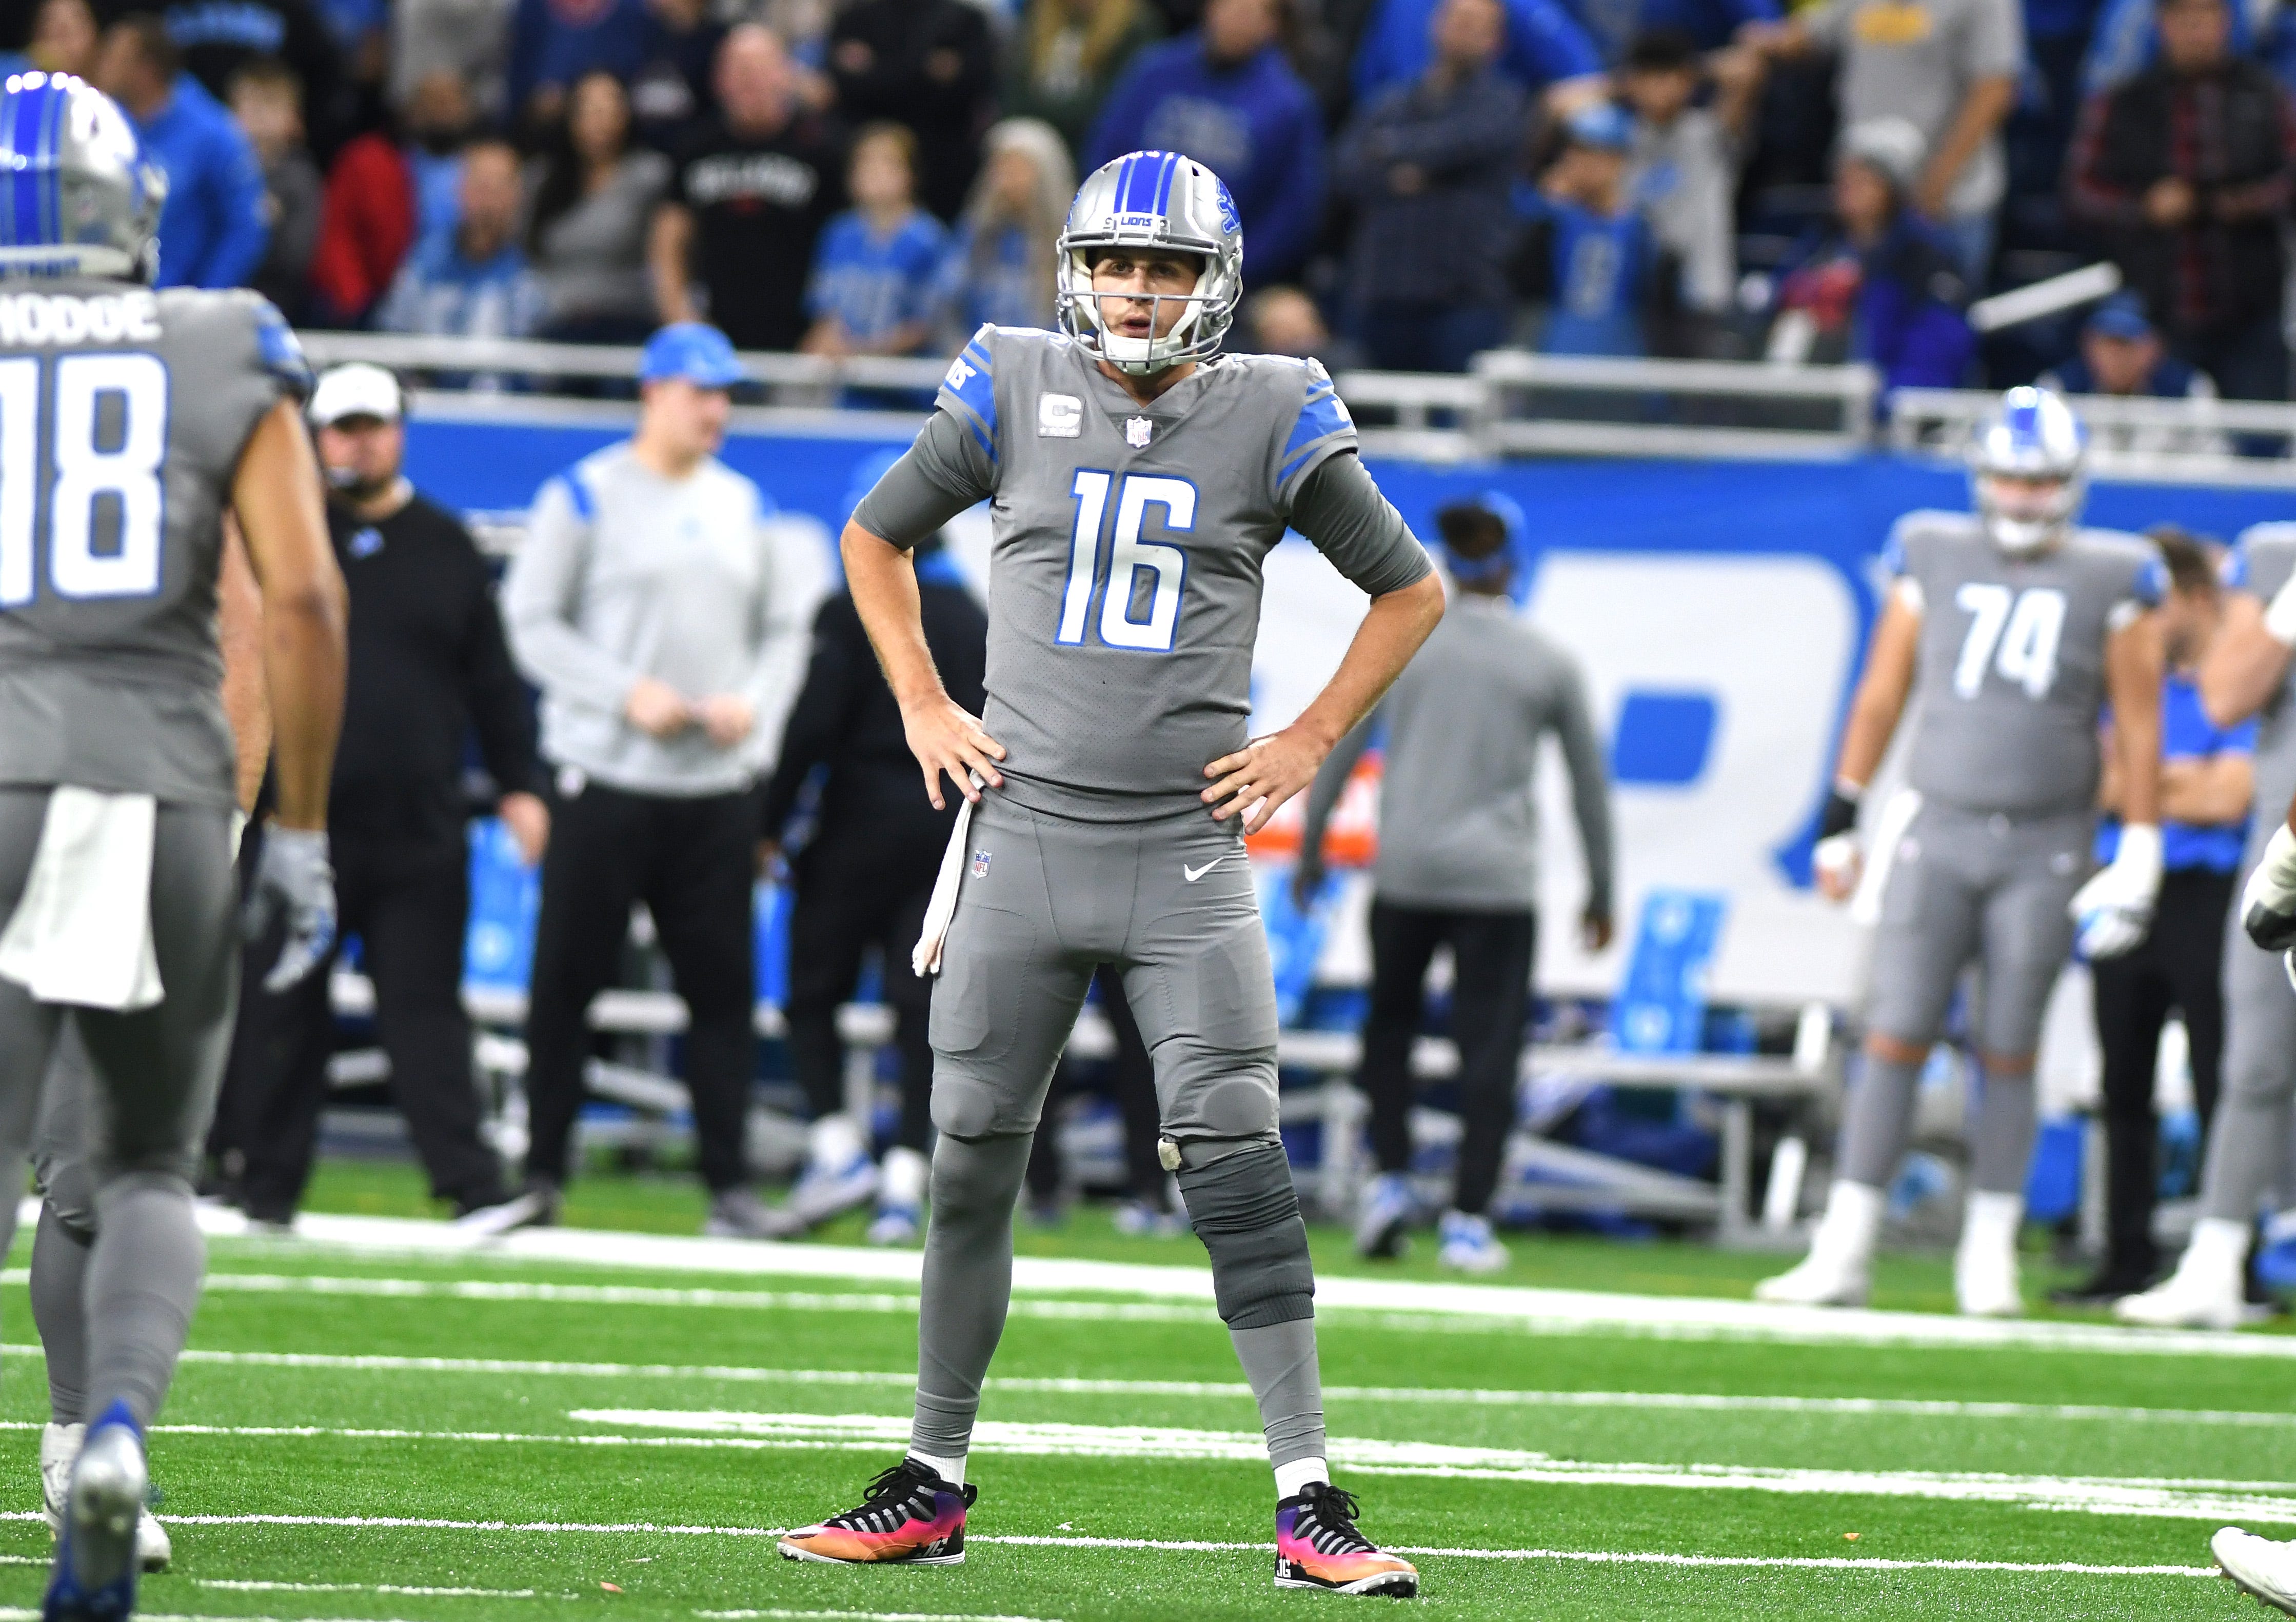 Lions quarterback Jared Goff picks up a delay of game penalty late in the froth quarter.